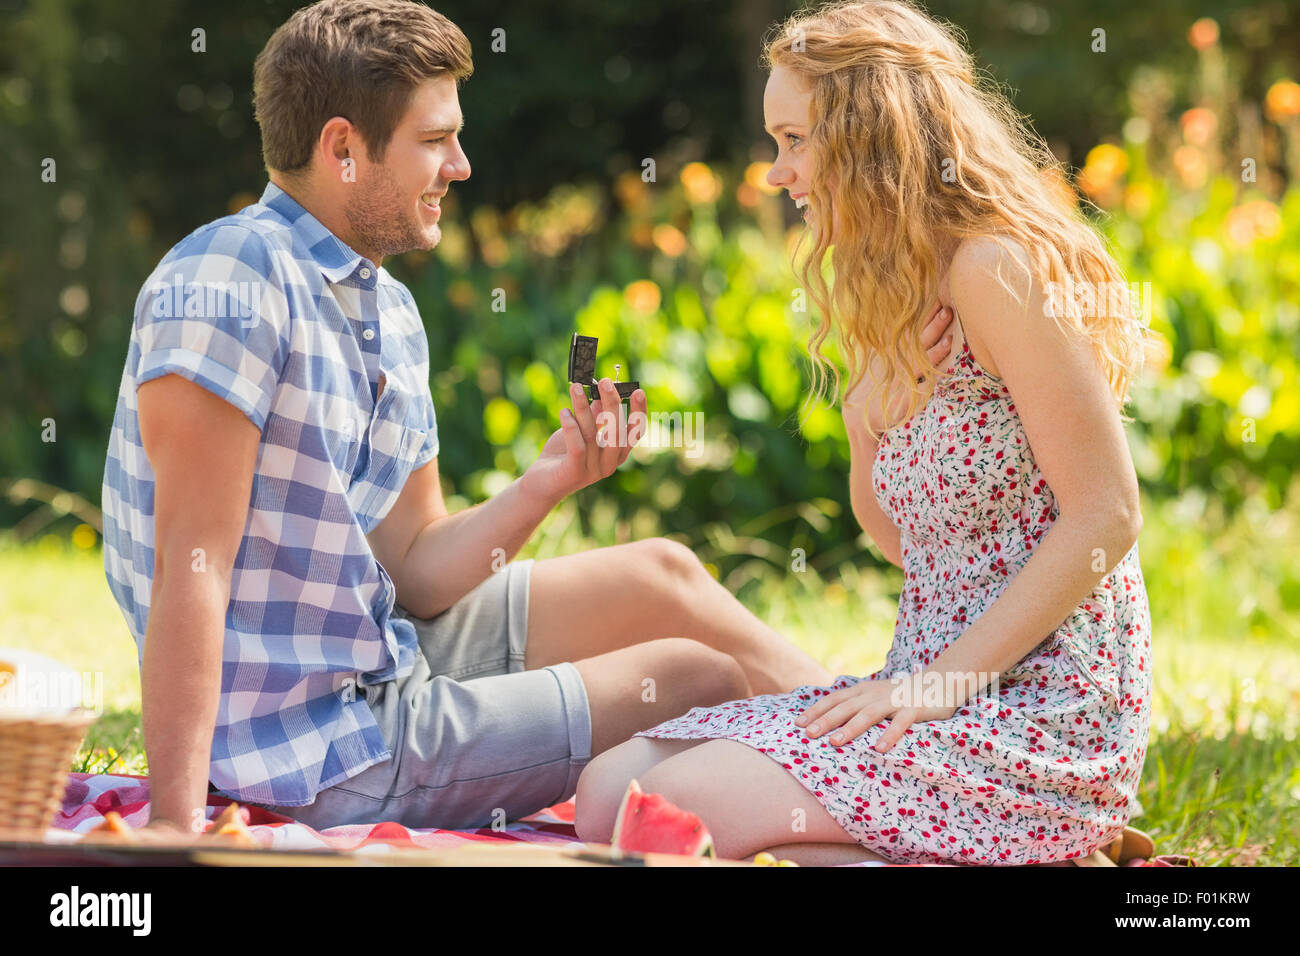 Young man propose to girlfriend Stock Photo